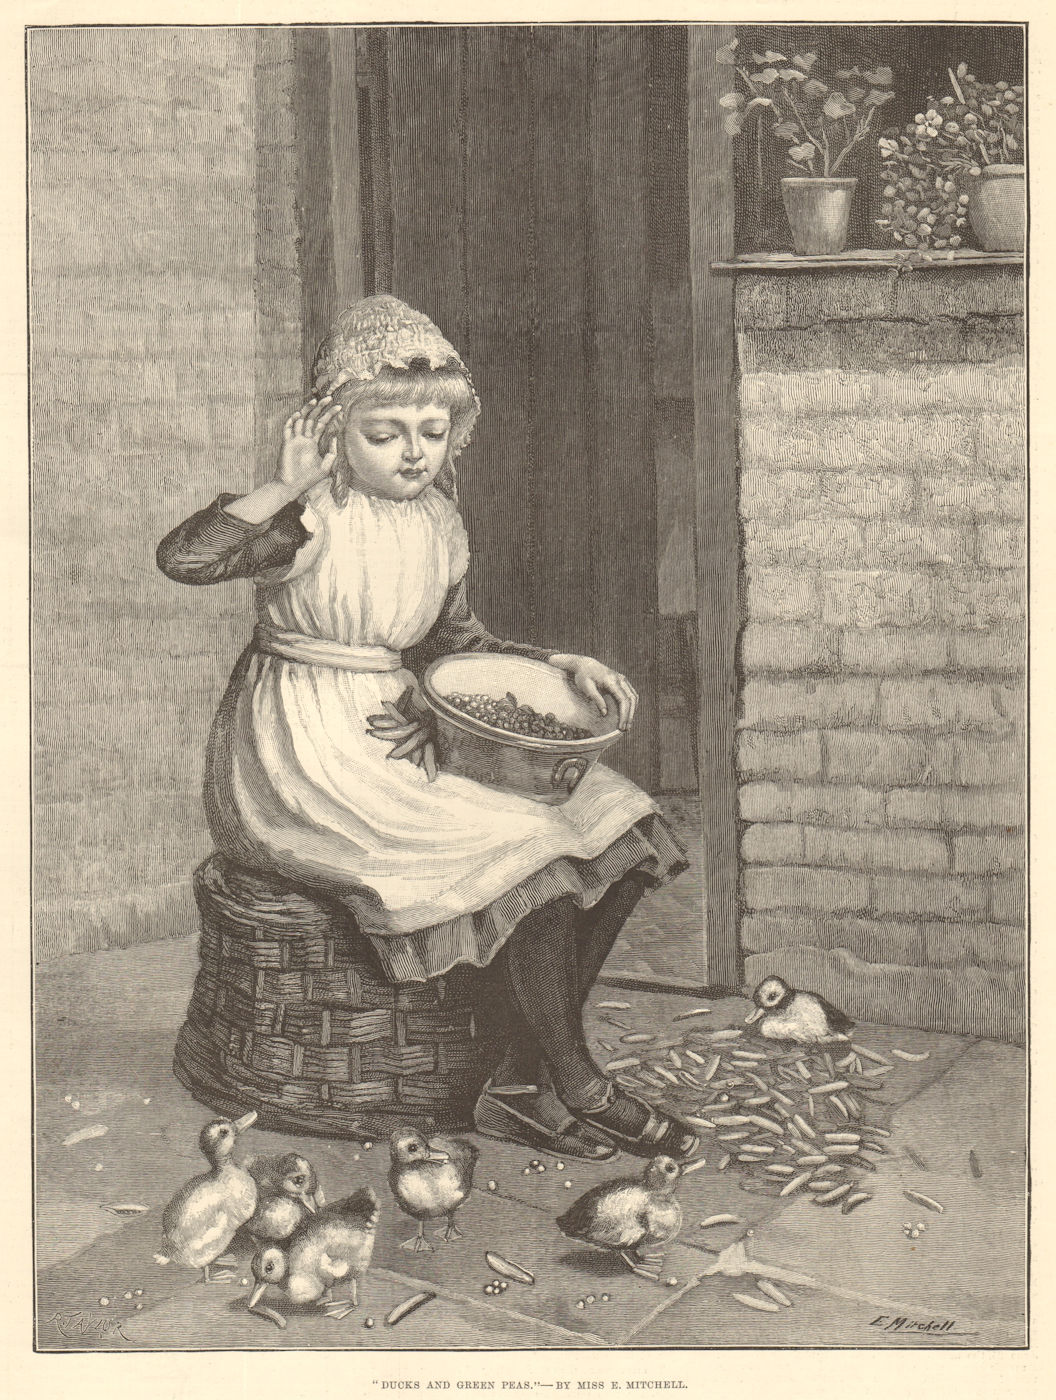 Associate Product "Ducks & green peas", by Miss E. Mitchell. Children. Birds 1890 ILN full page